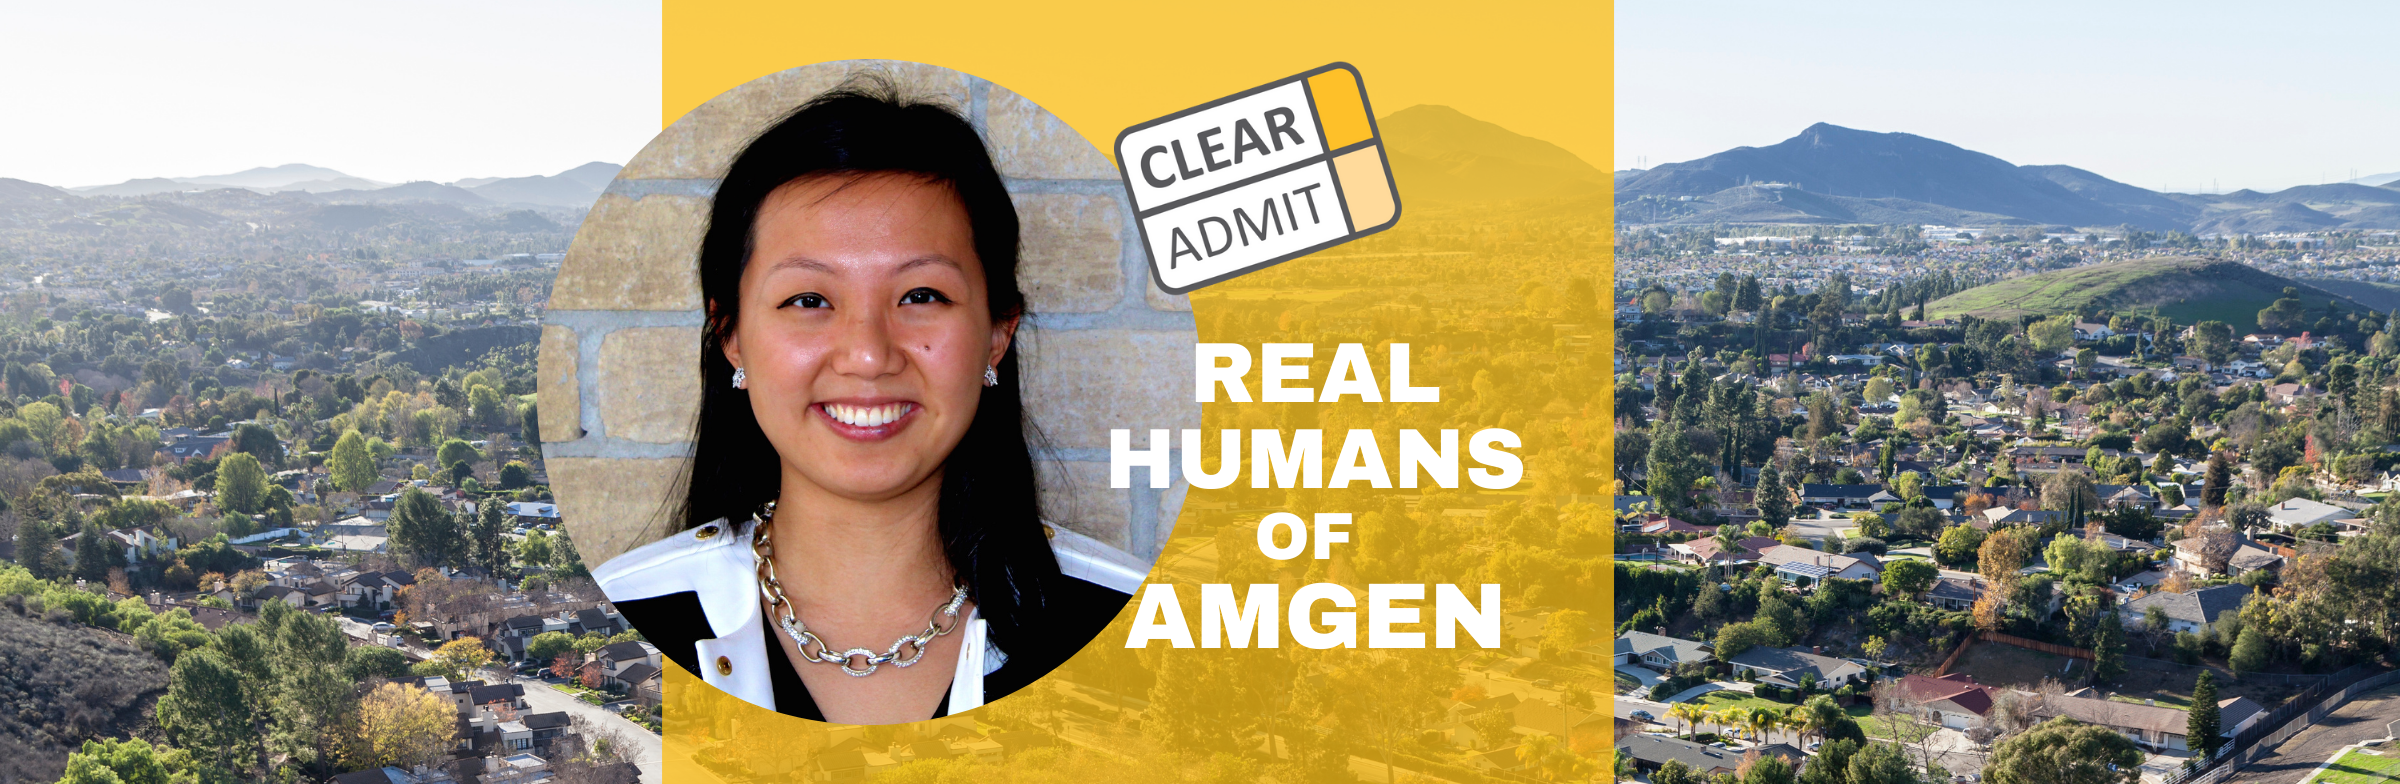 Image for Real Humans of Amgen: Angelinda Chen, Wharton ‘18, Global Marketing Manager, Oncology Pipeline